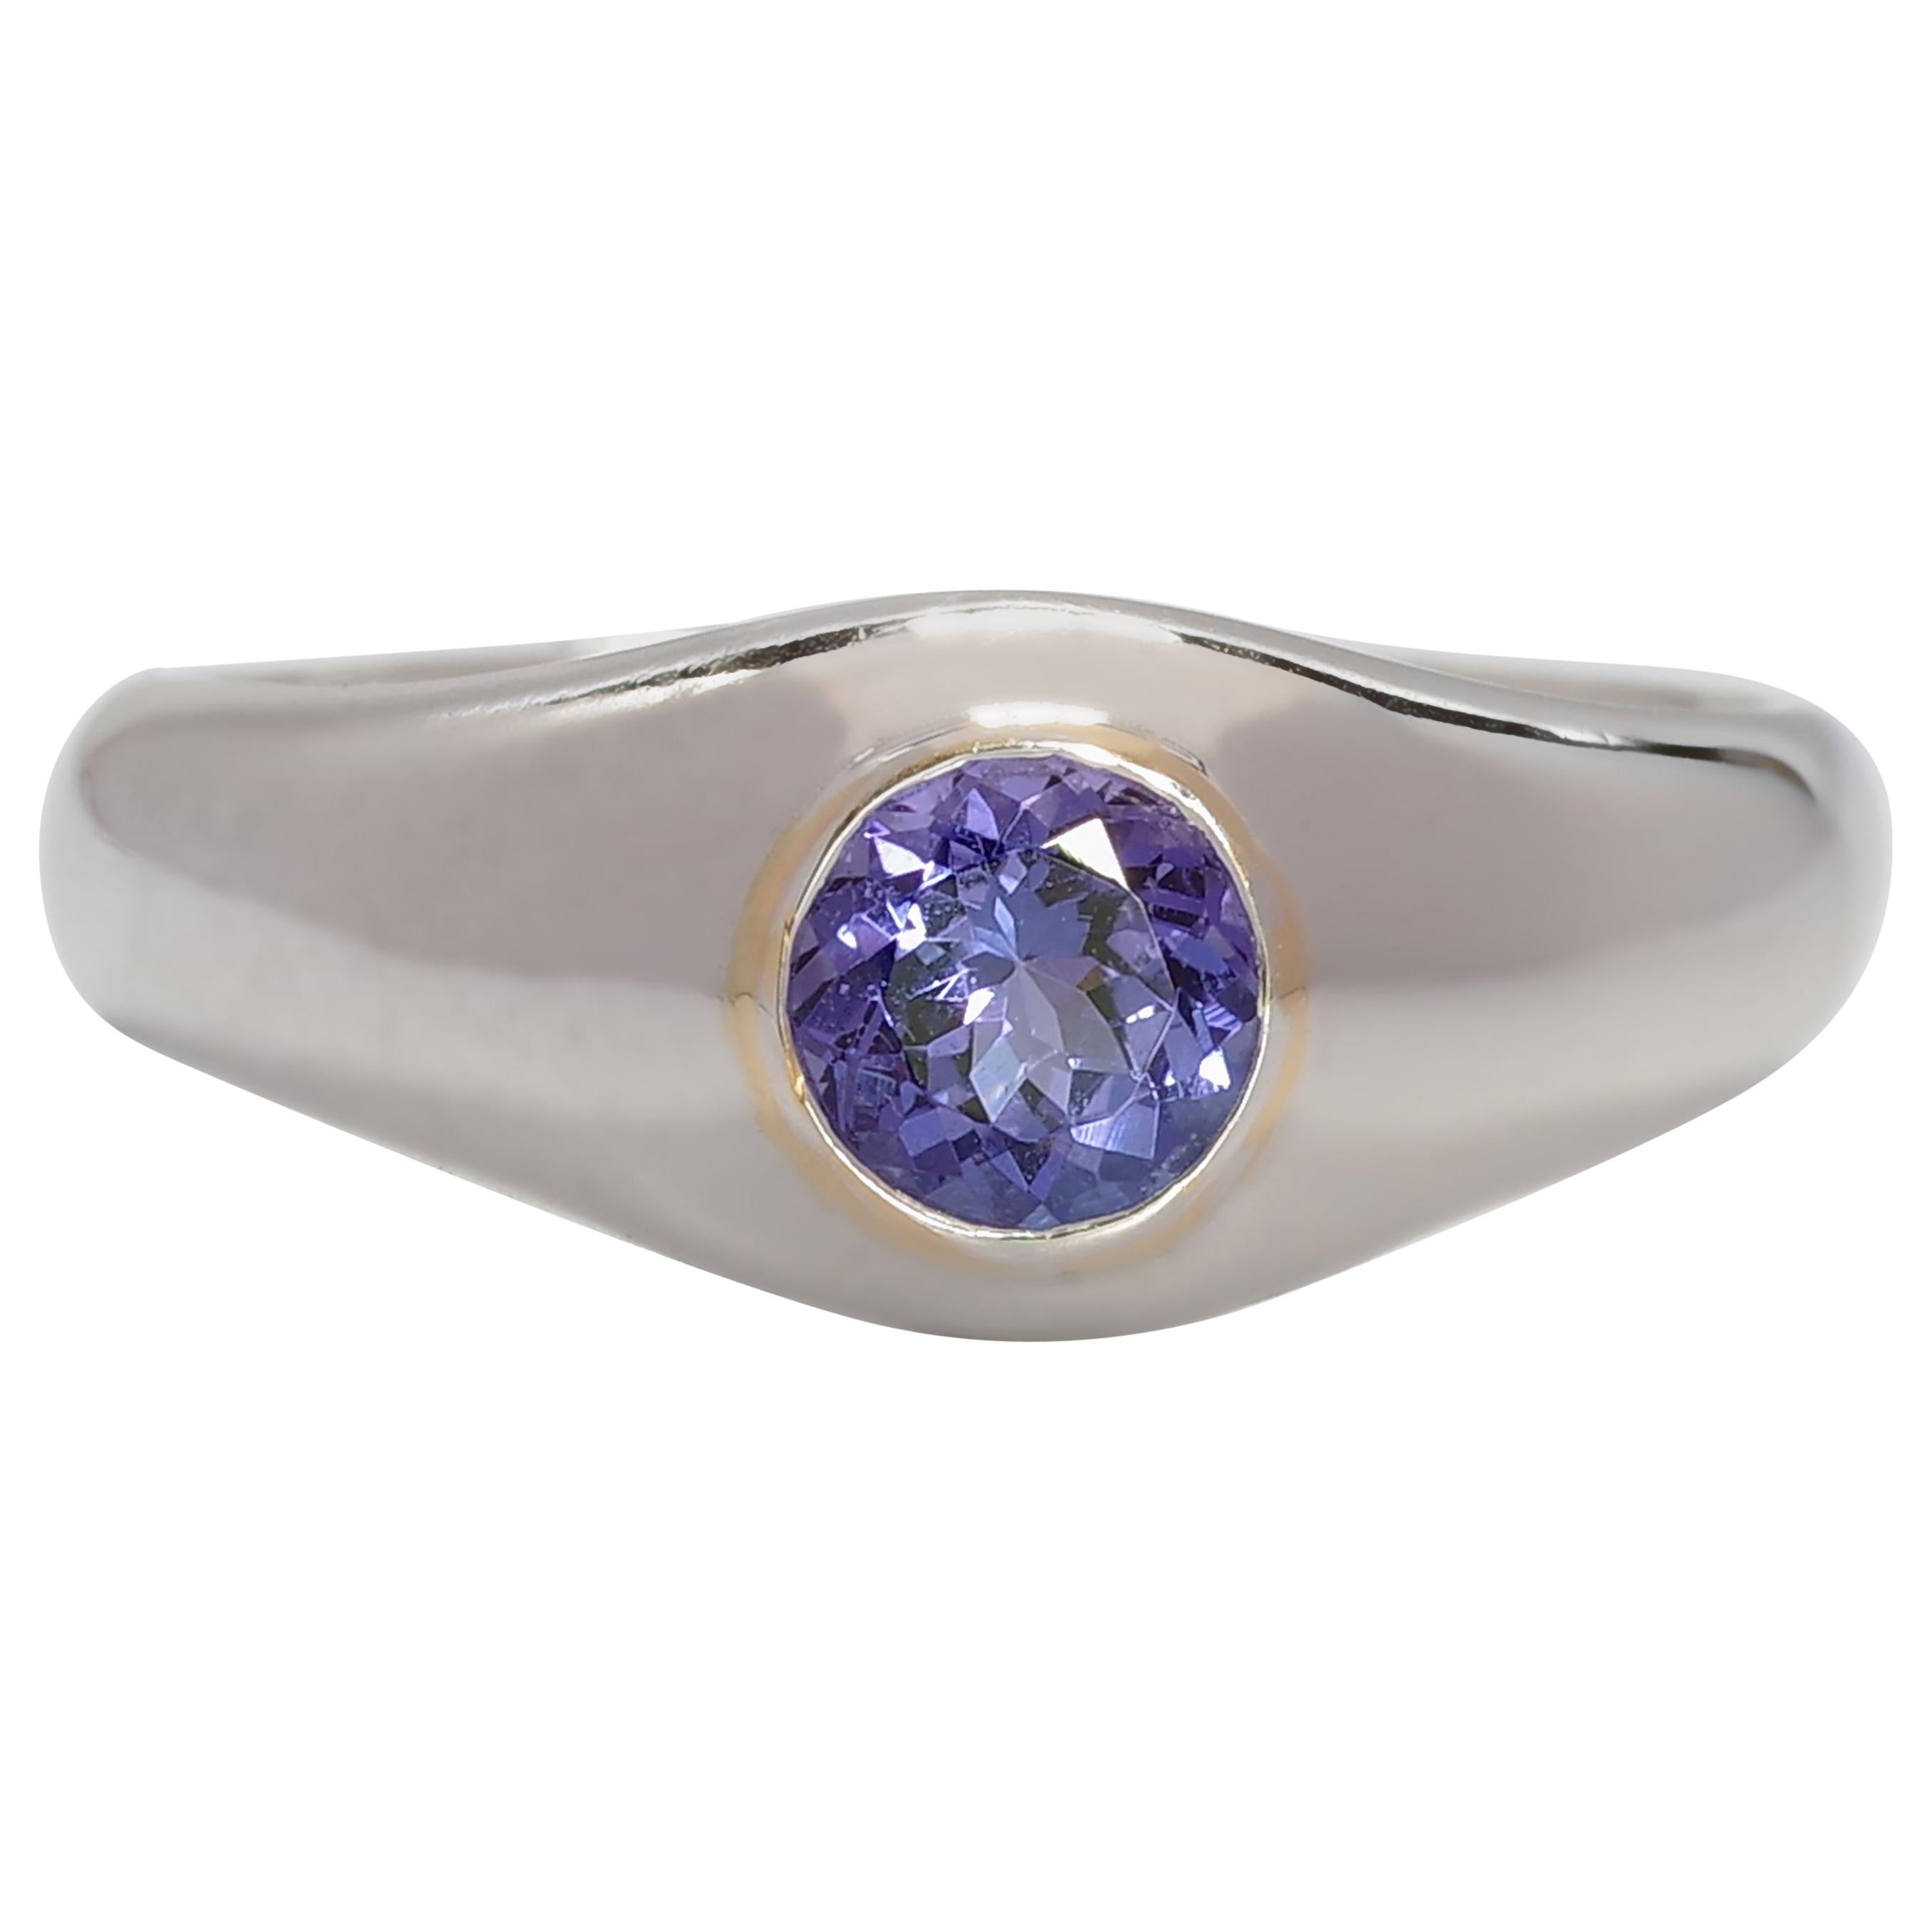 Here's the thing: Tanzanite rings for men typically feature huge stones and lots of diamonds. I felt there should be a more *discreet* men's tanzanite ring so I designed one and had it fabricated by a jeweler in Manhattan. This 14k white gold ring